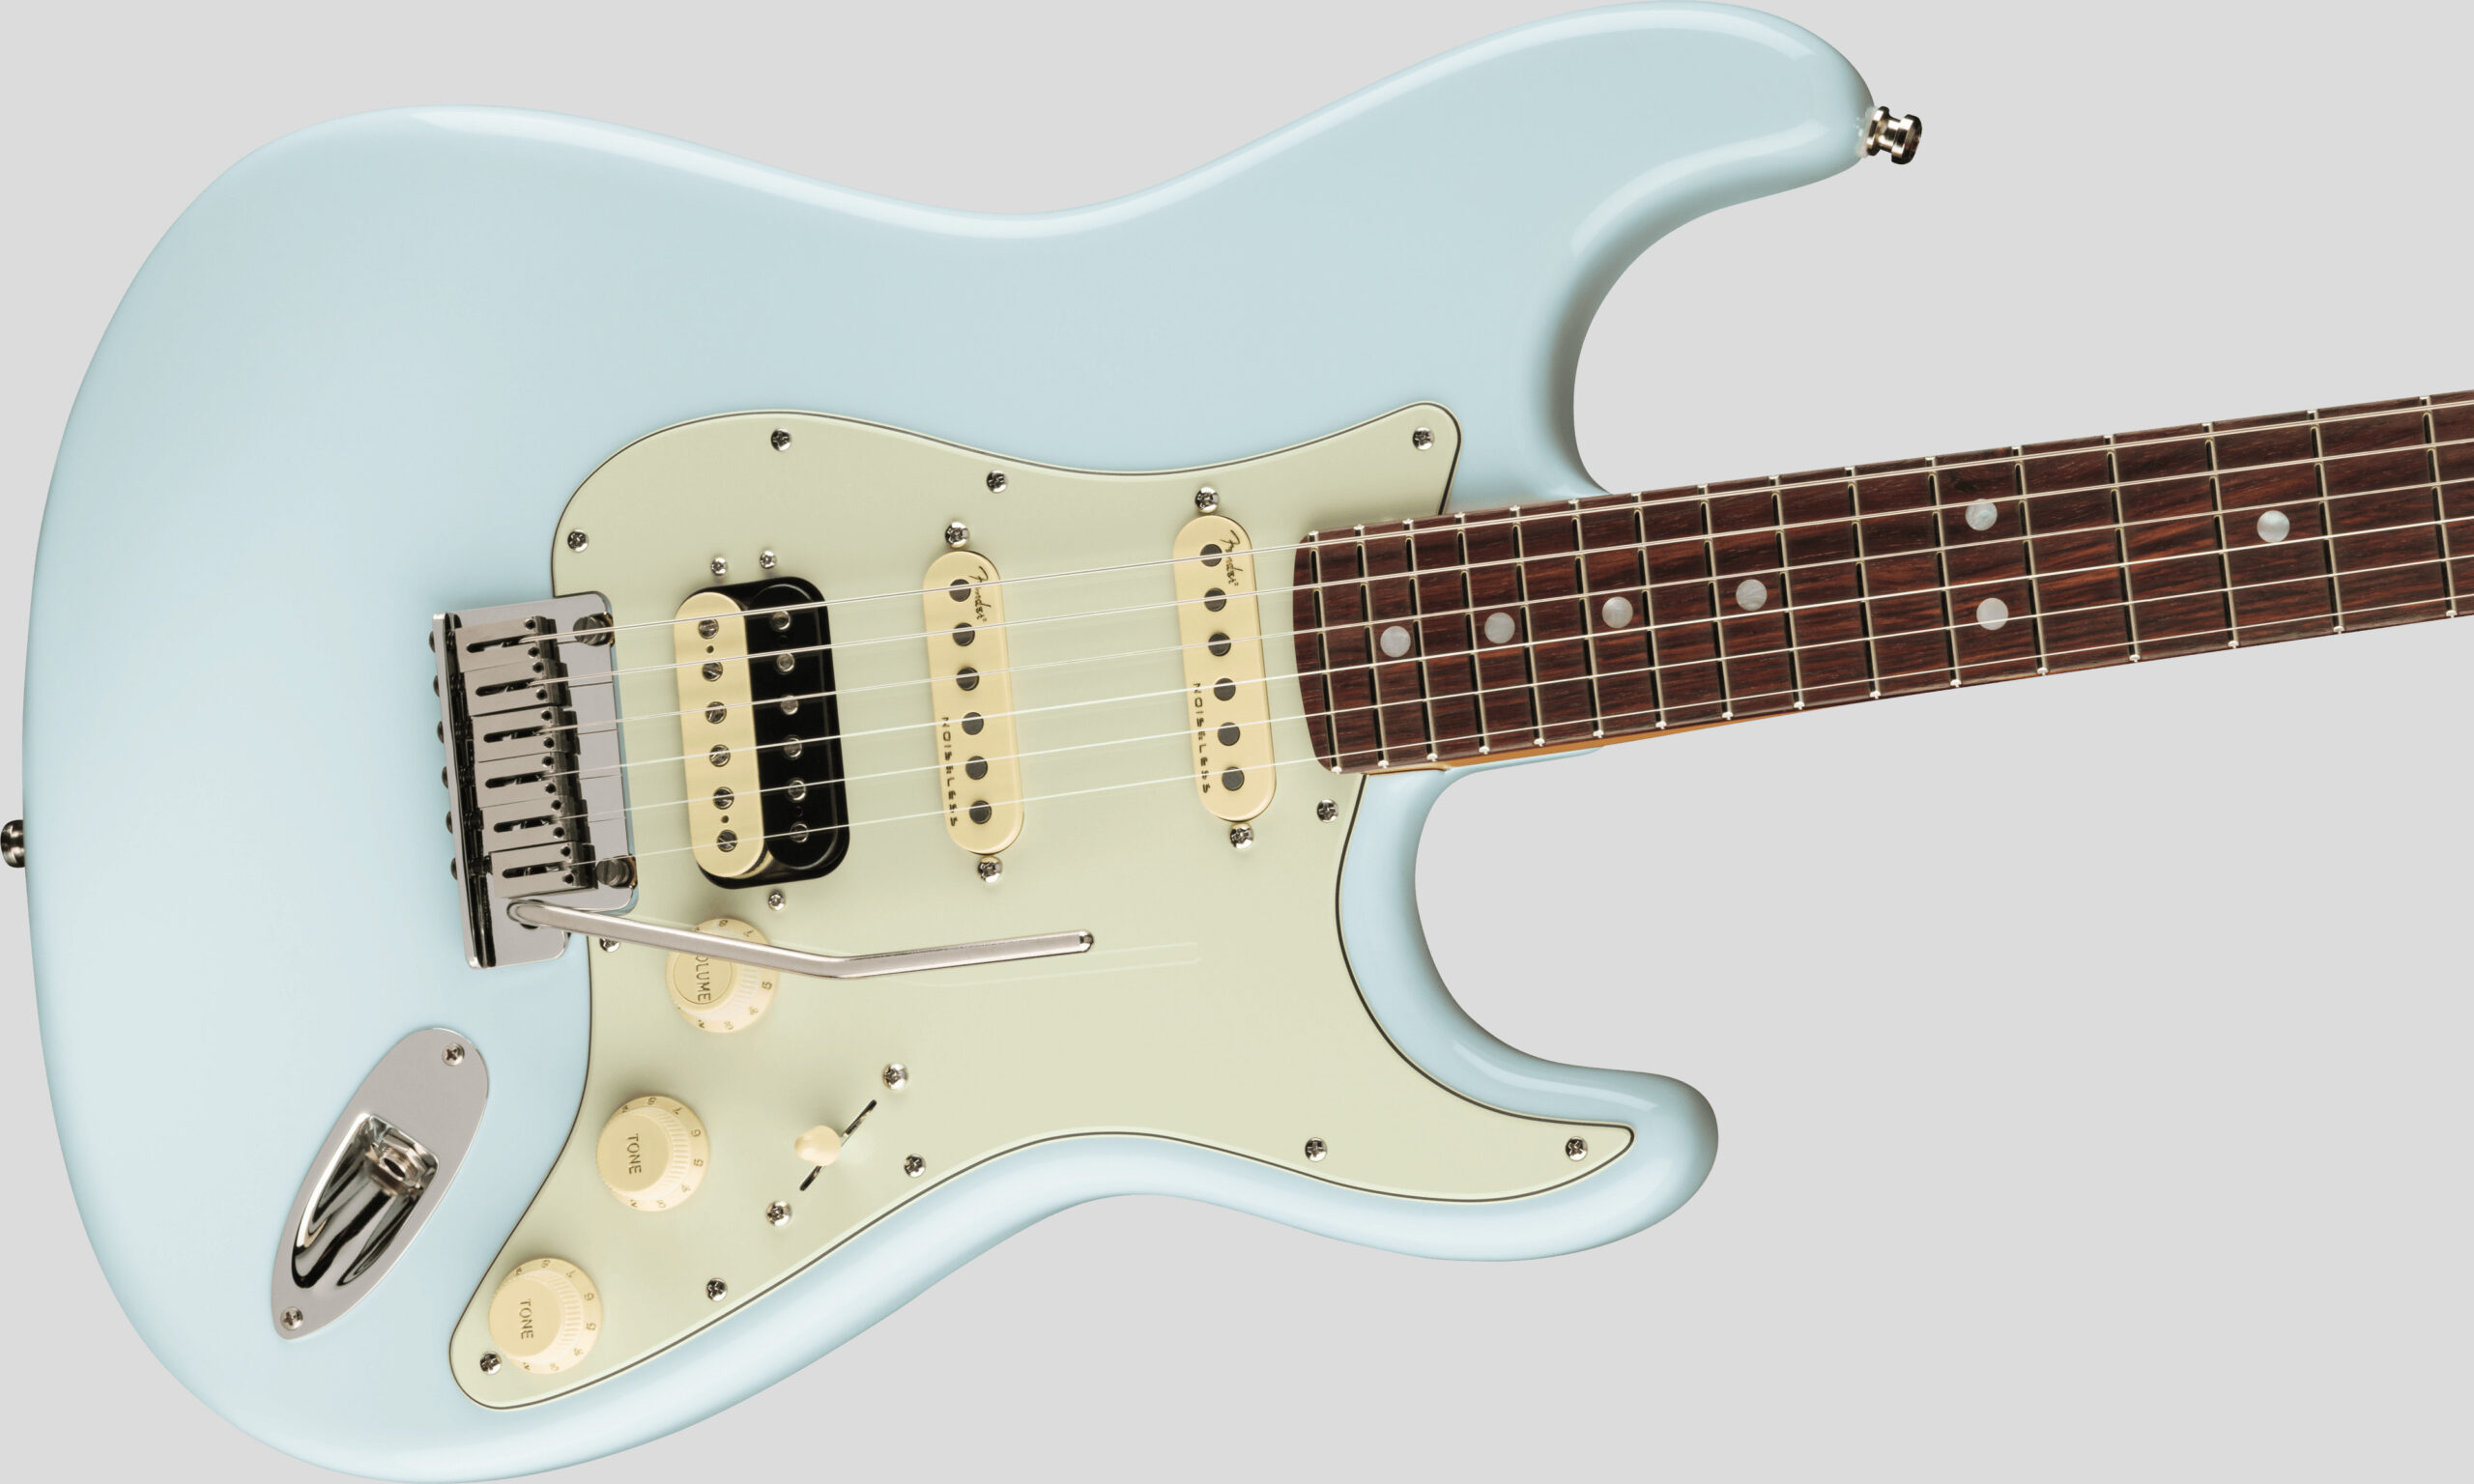 Fender Limited Edition American Ultra Stratocaster HSS Sonic Blue 3